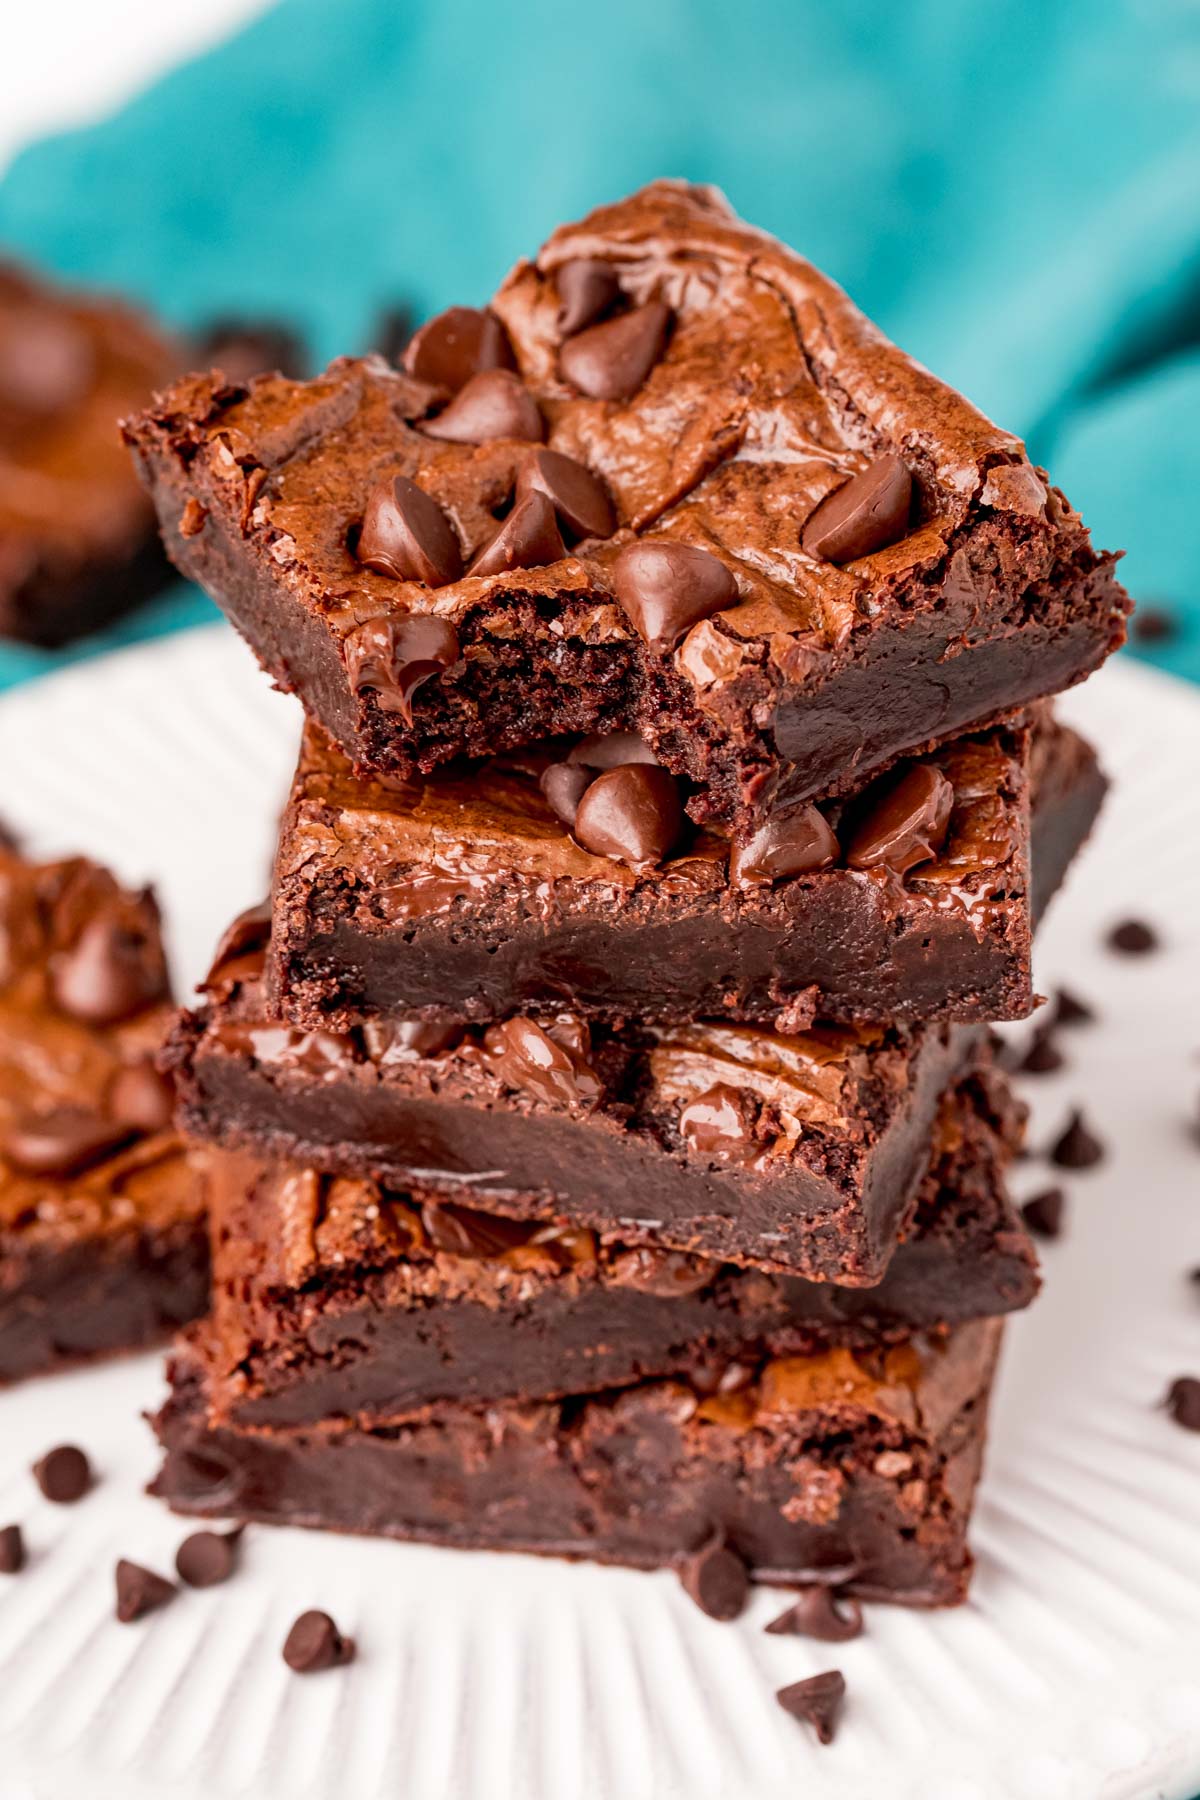 close up photo of a stack of brownies with the top one missing a bite.